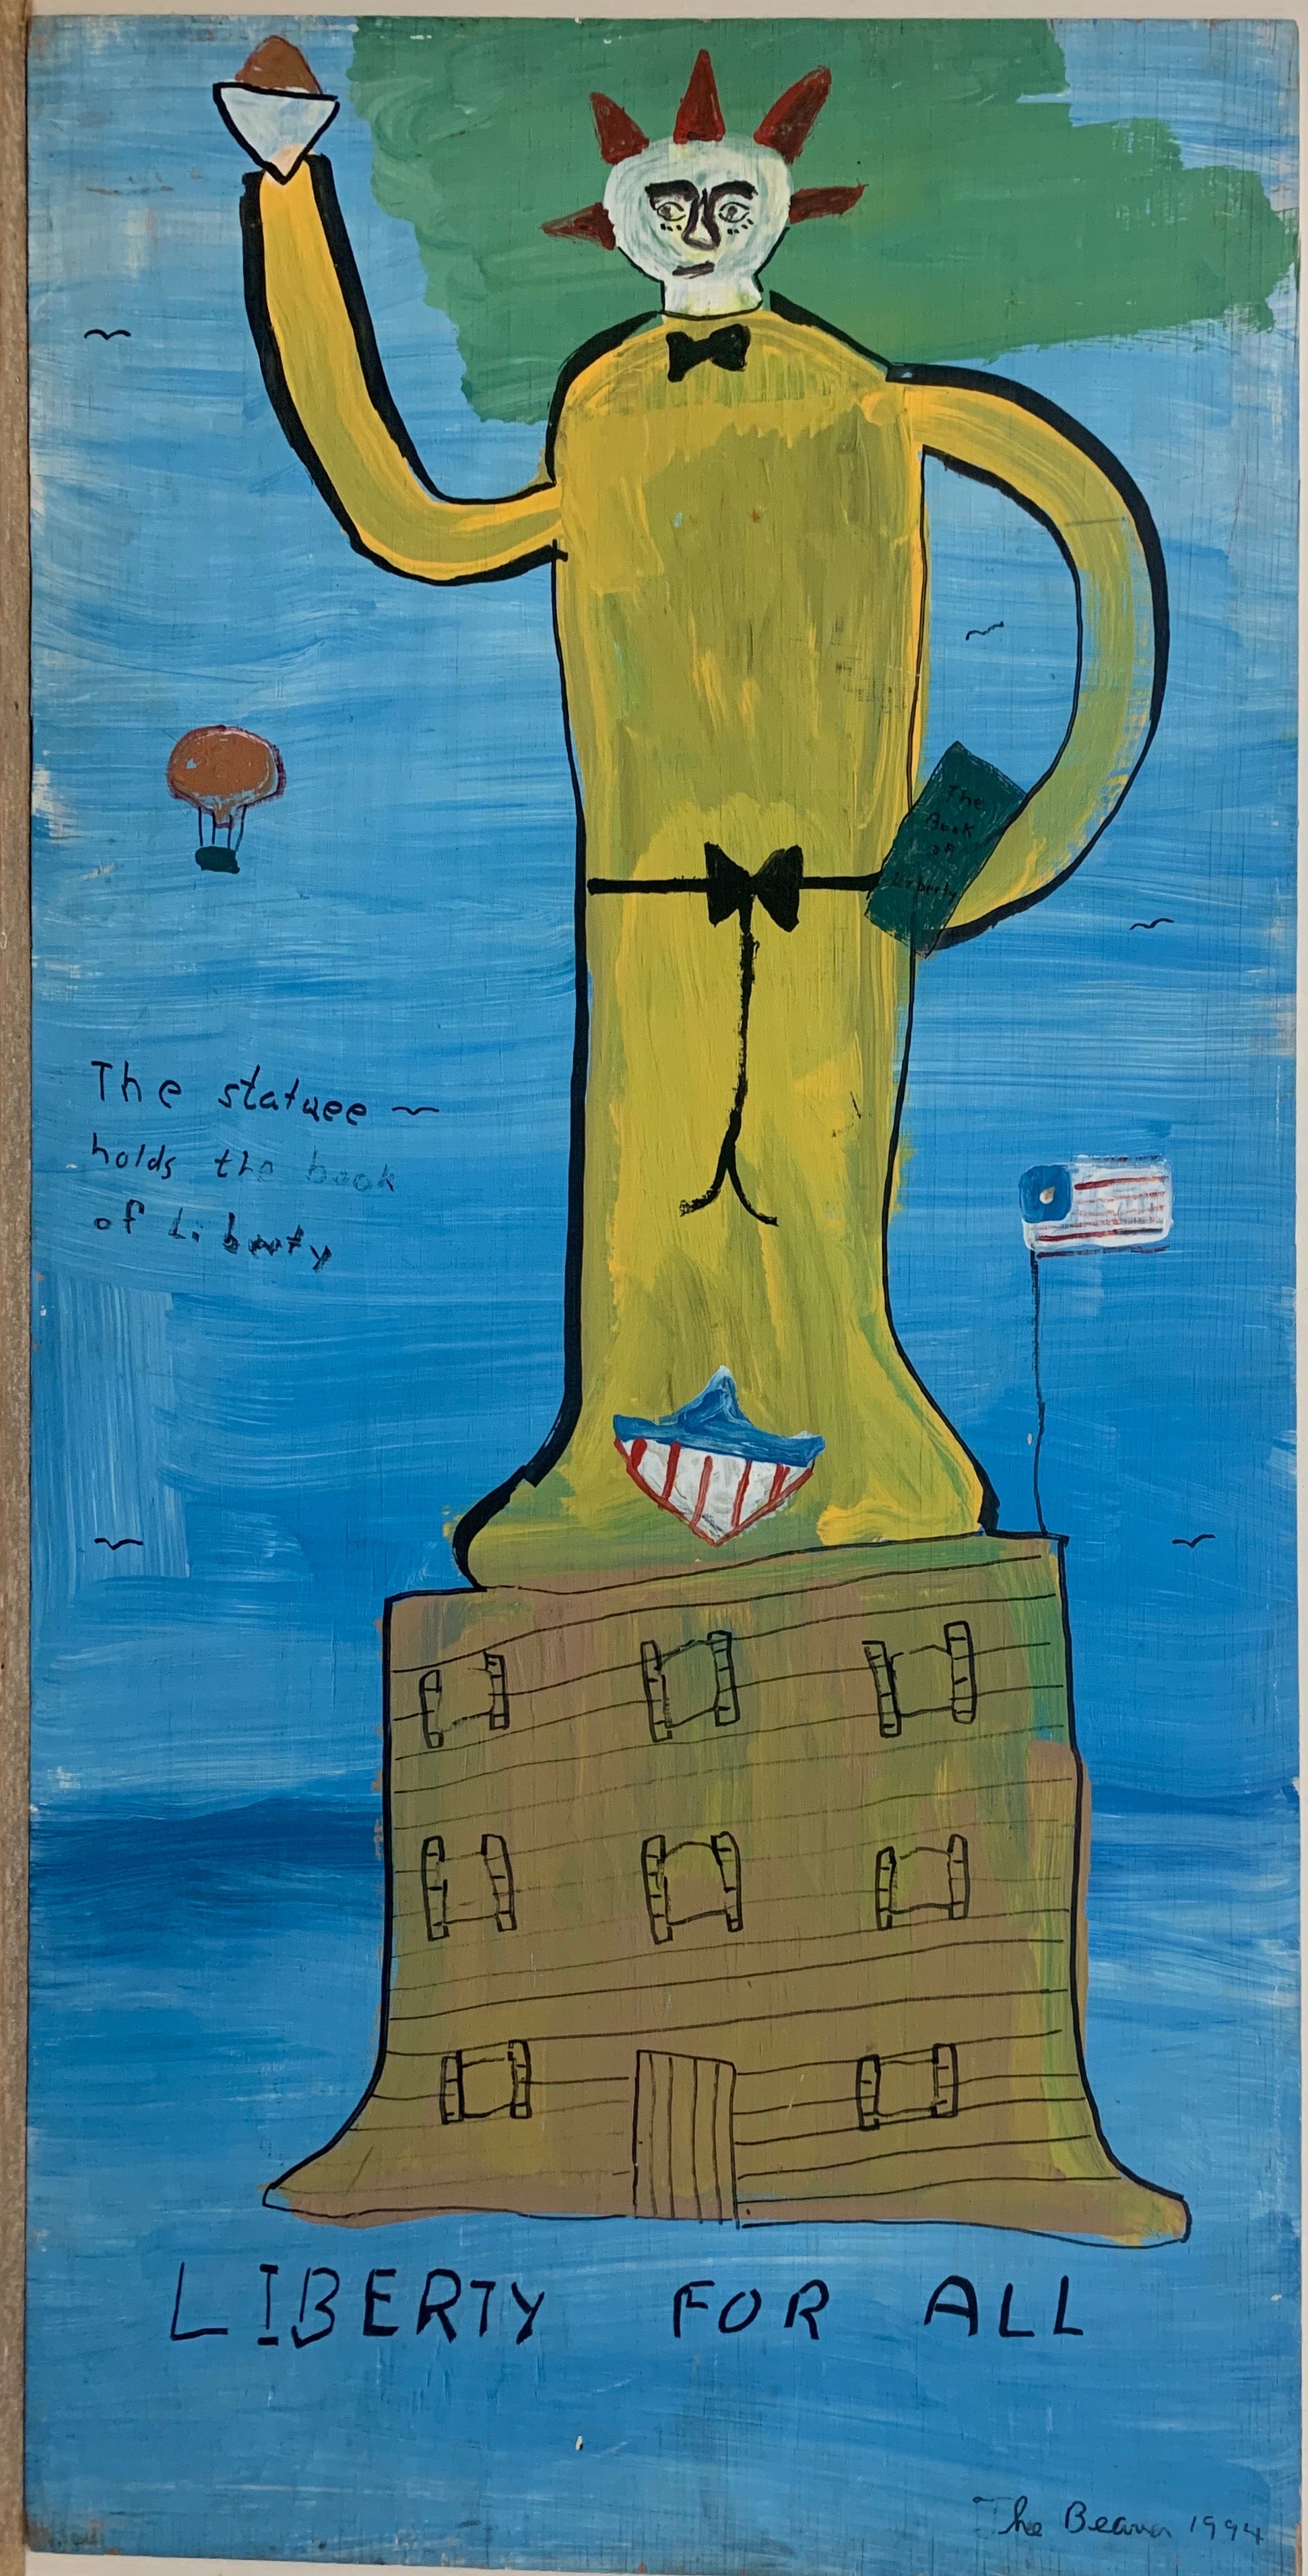 A painting by the Beaver of the Statue of Liberty in yellow with spiked hair. 